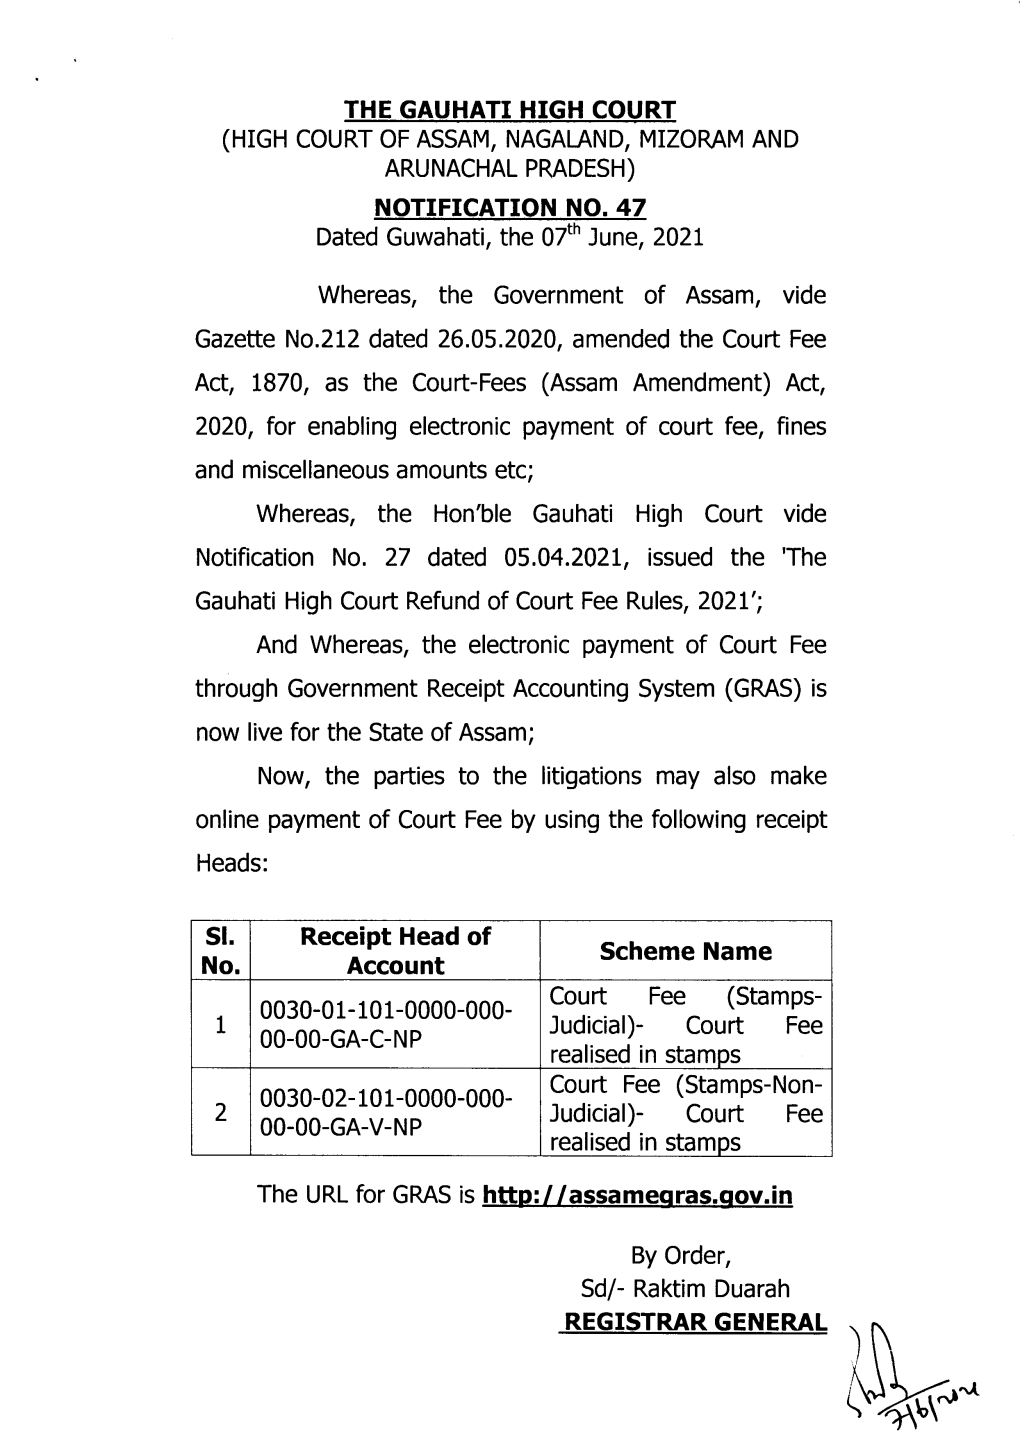 Notification Dated 07/06/2021 of the Hon'ble Gauhati High Court